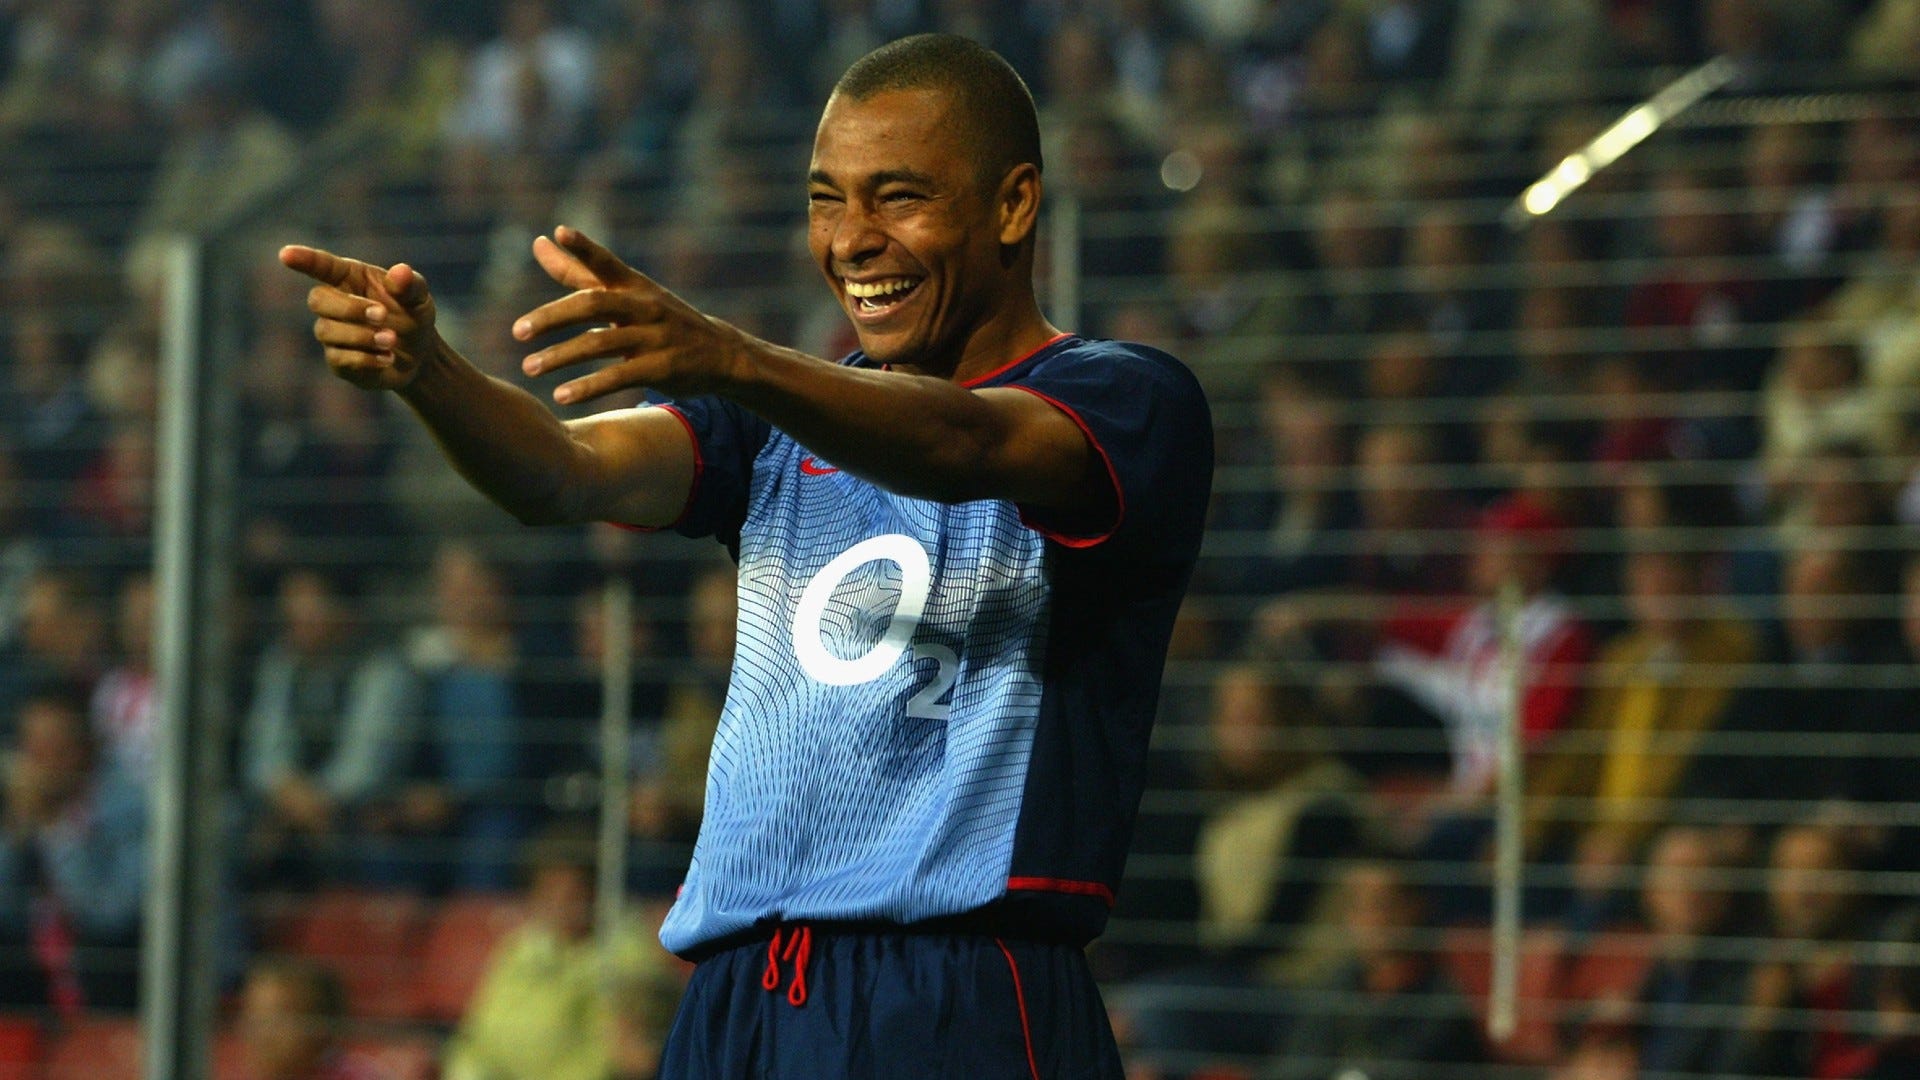 Gilberto in 20.7 seconds! Where are the Arsenal team that helped make Champions League history at PSV now?